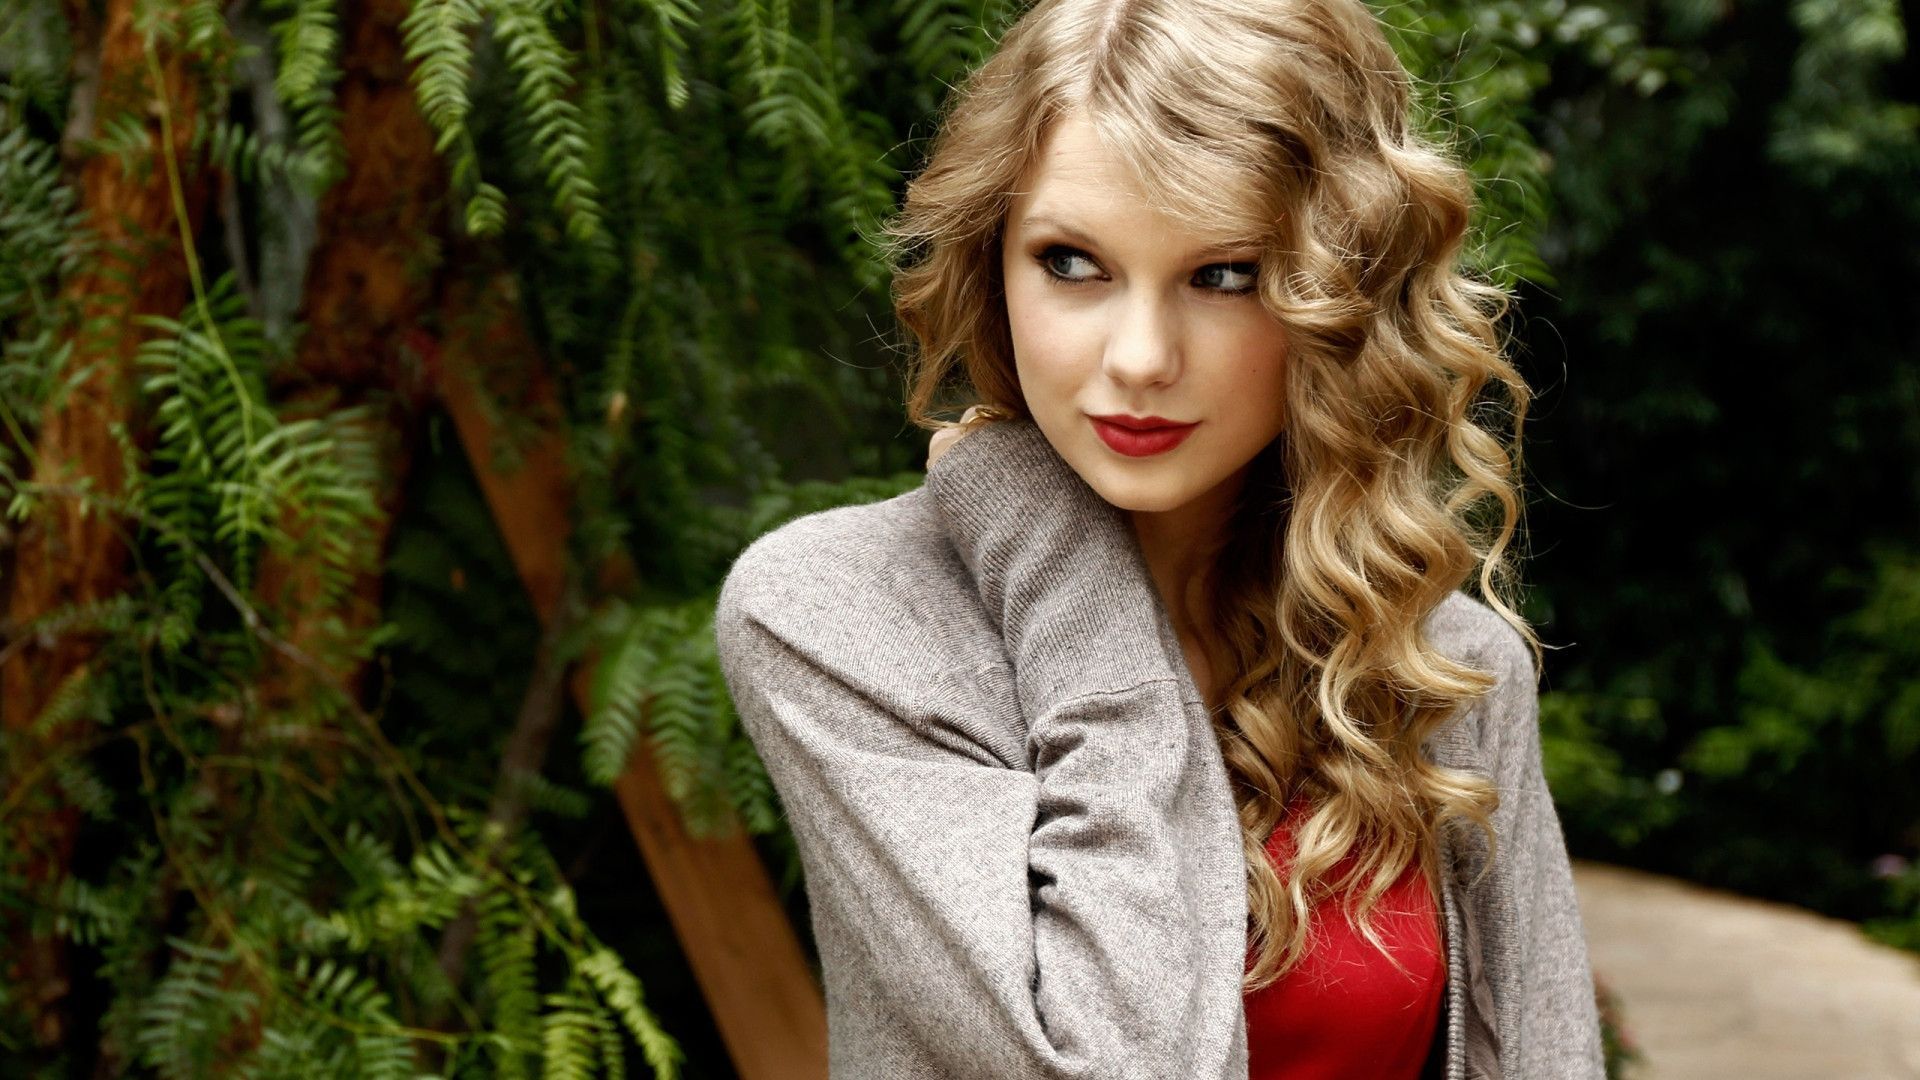 Taylor Swift Backgrounds